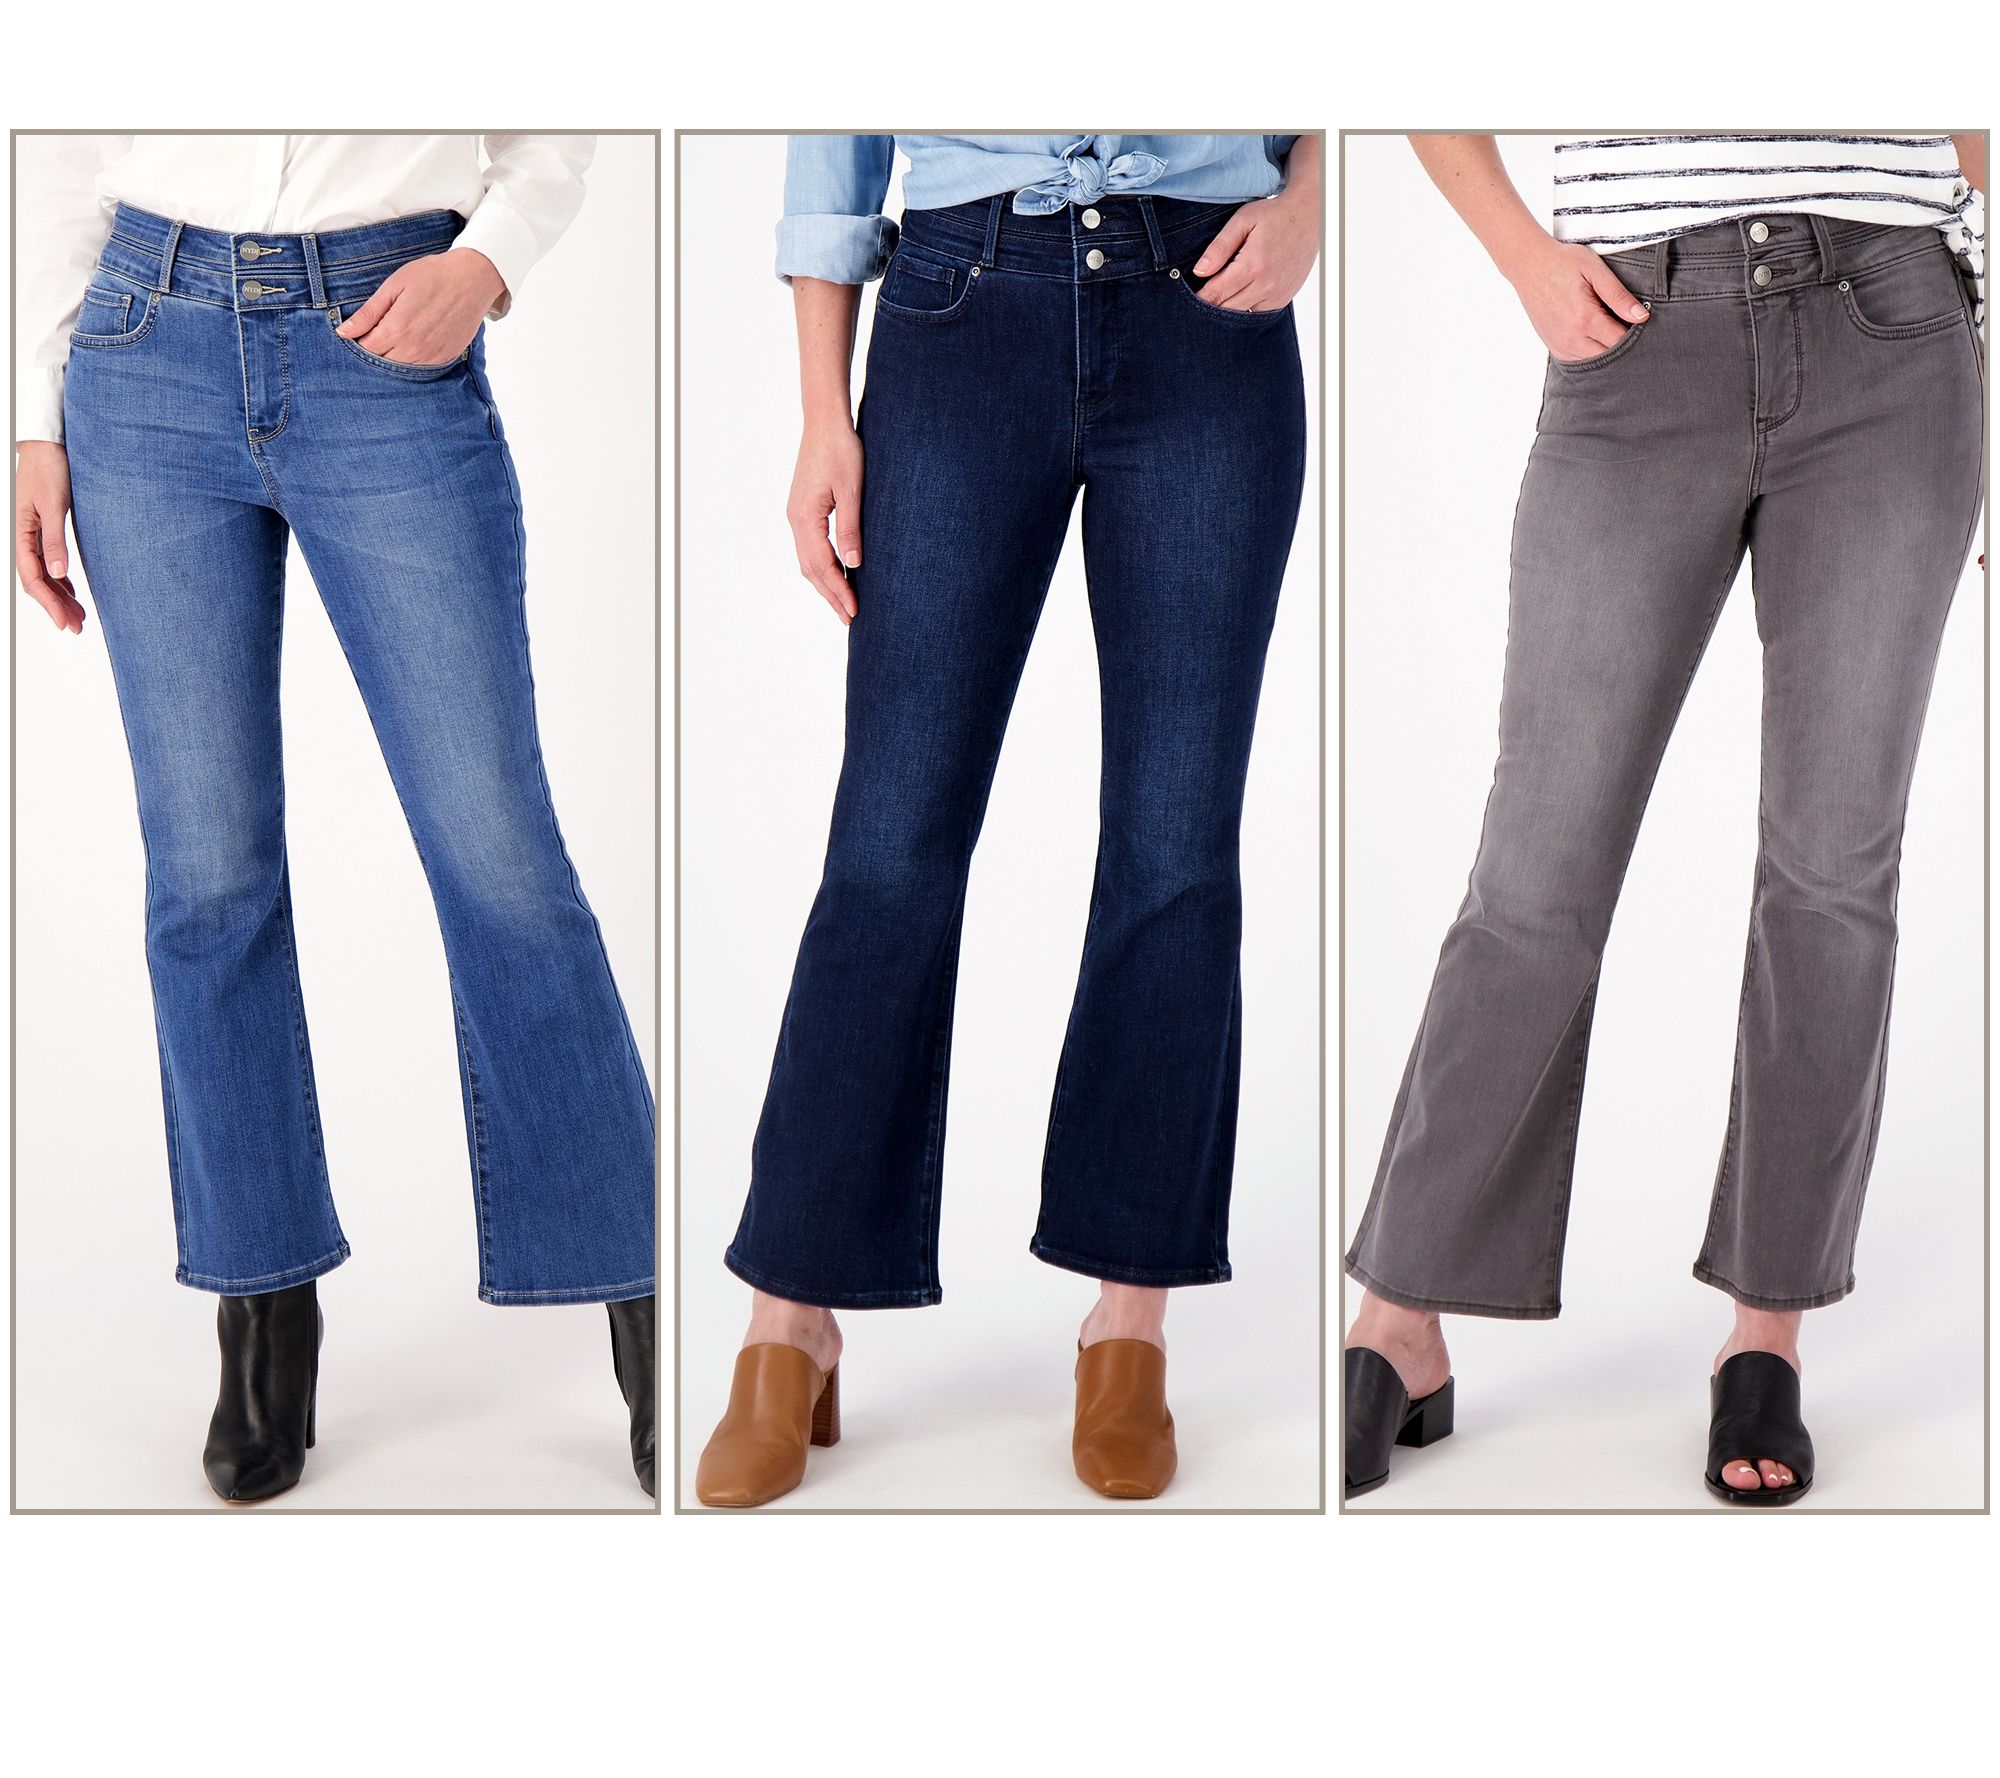 NYDJ Higher Rise Ava Flare Jeans with Double Button - QVC.com